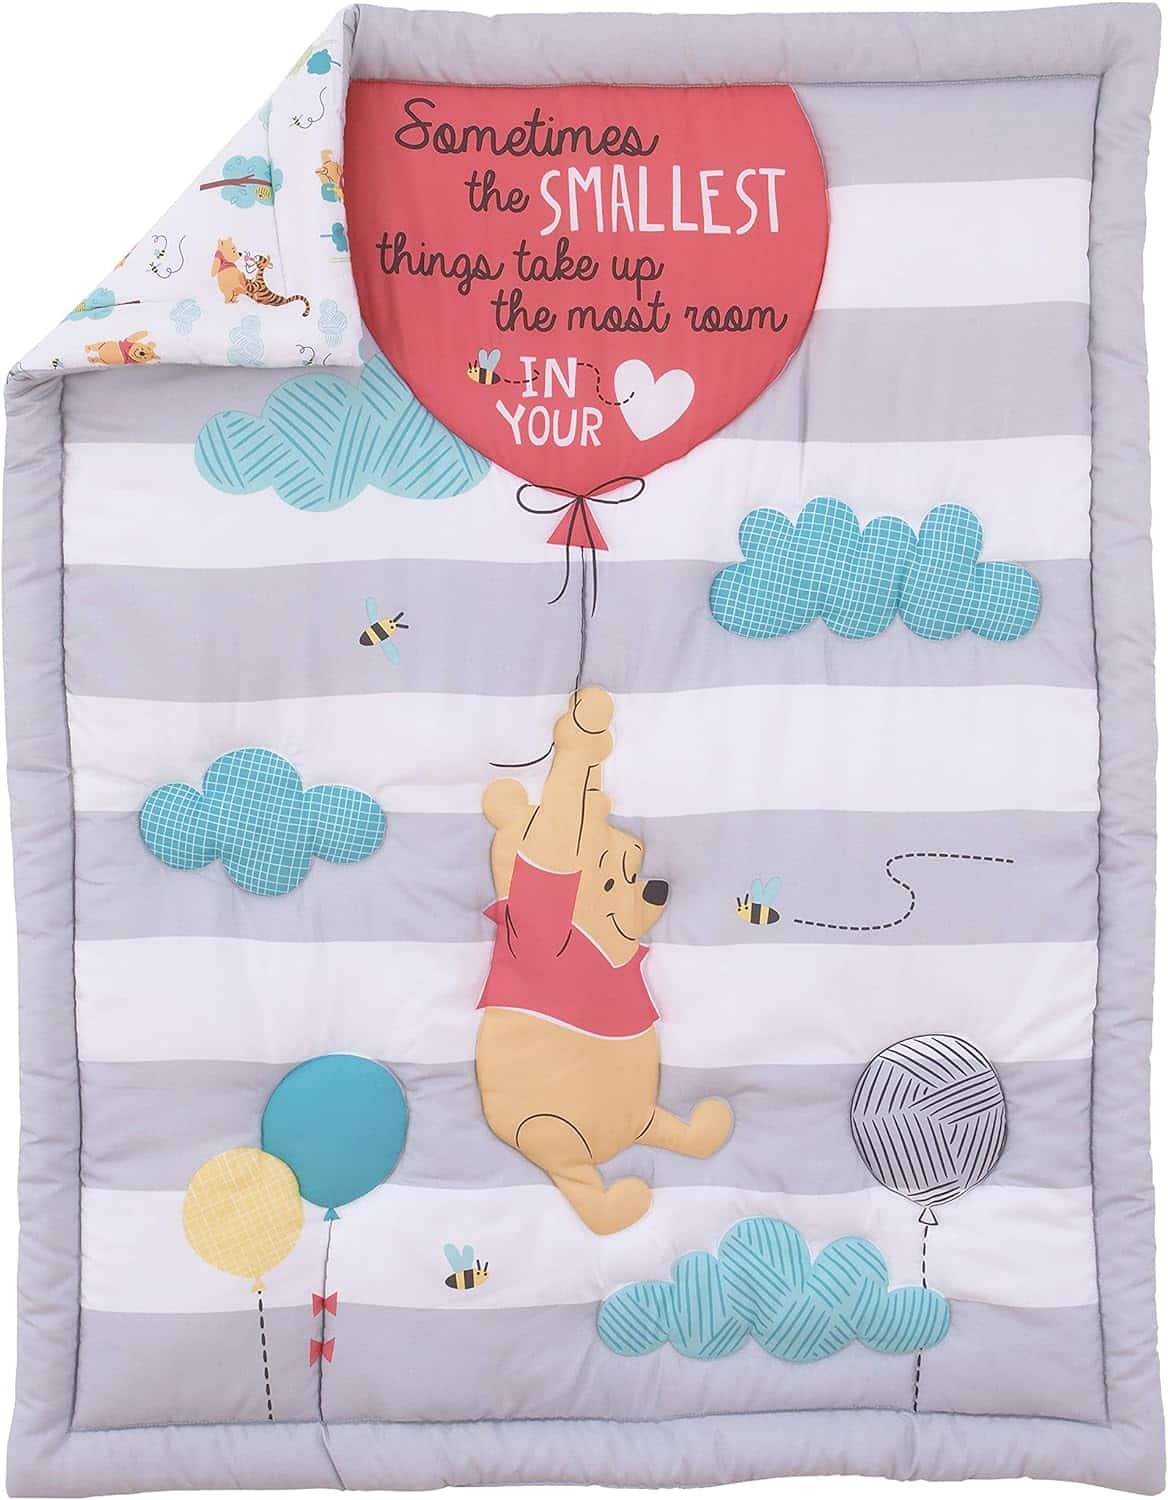 Disney's Winnie The Pooh First Best Friend 4 Piece Nursery Crib Bedding Set: A Whimsical Journey to the Hundred Acre Woods